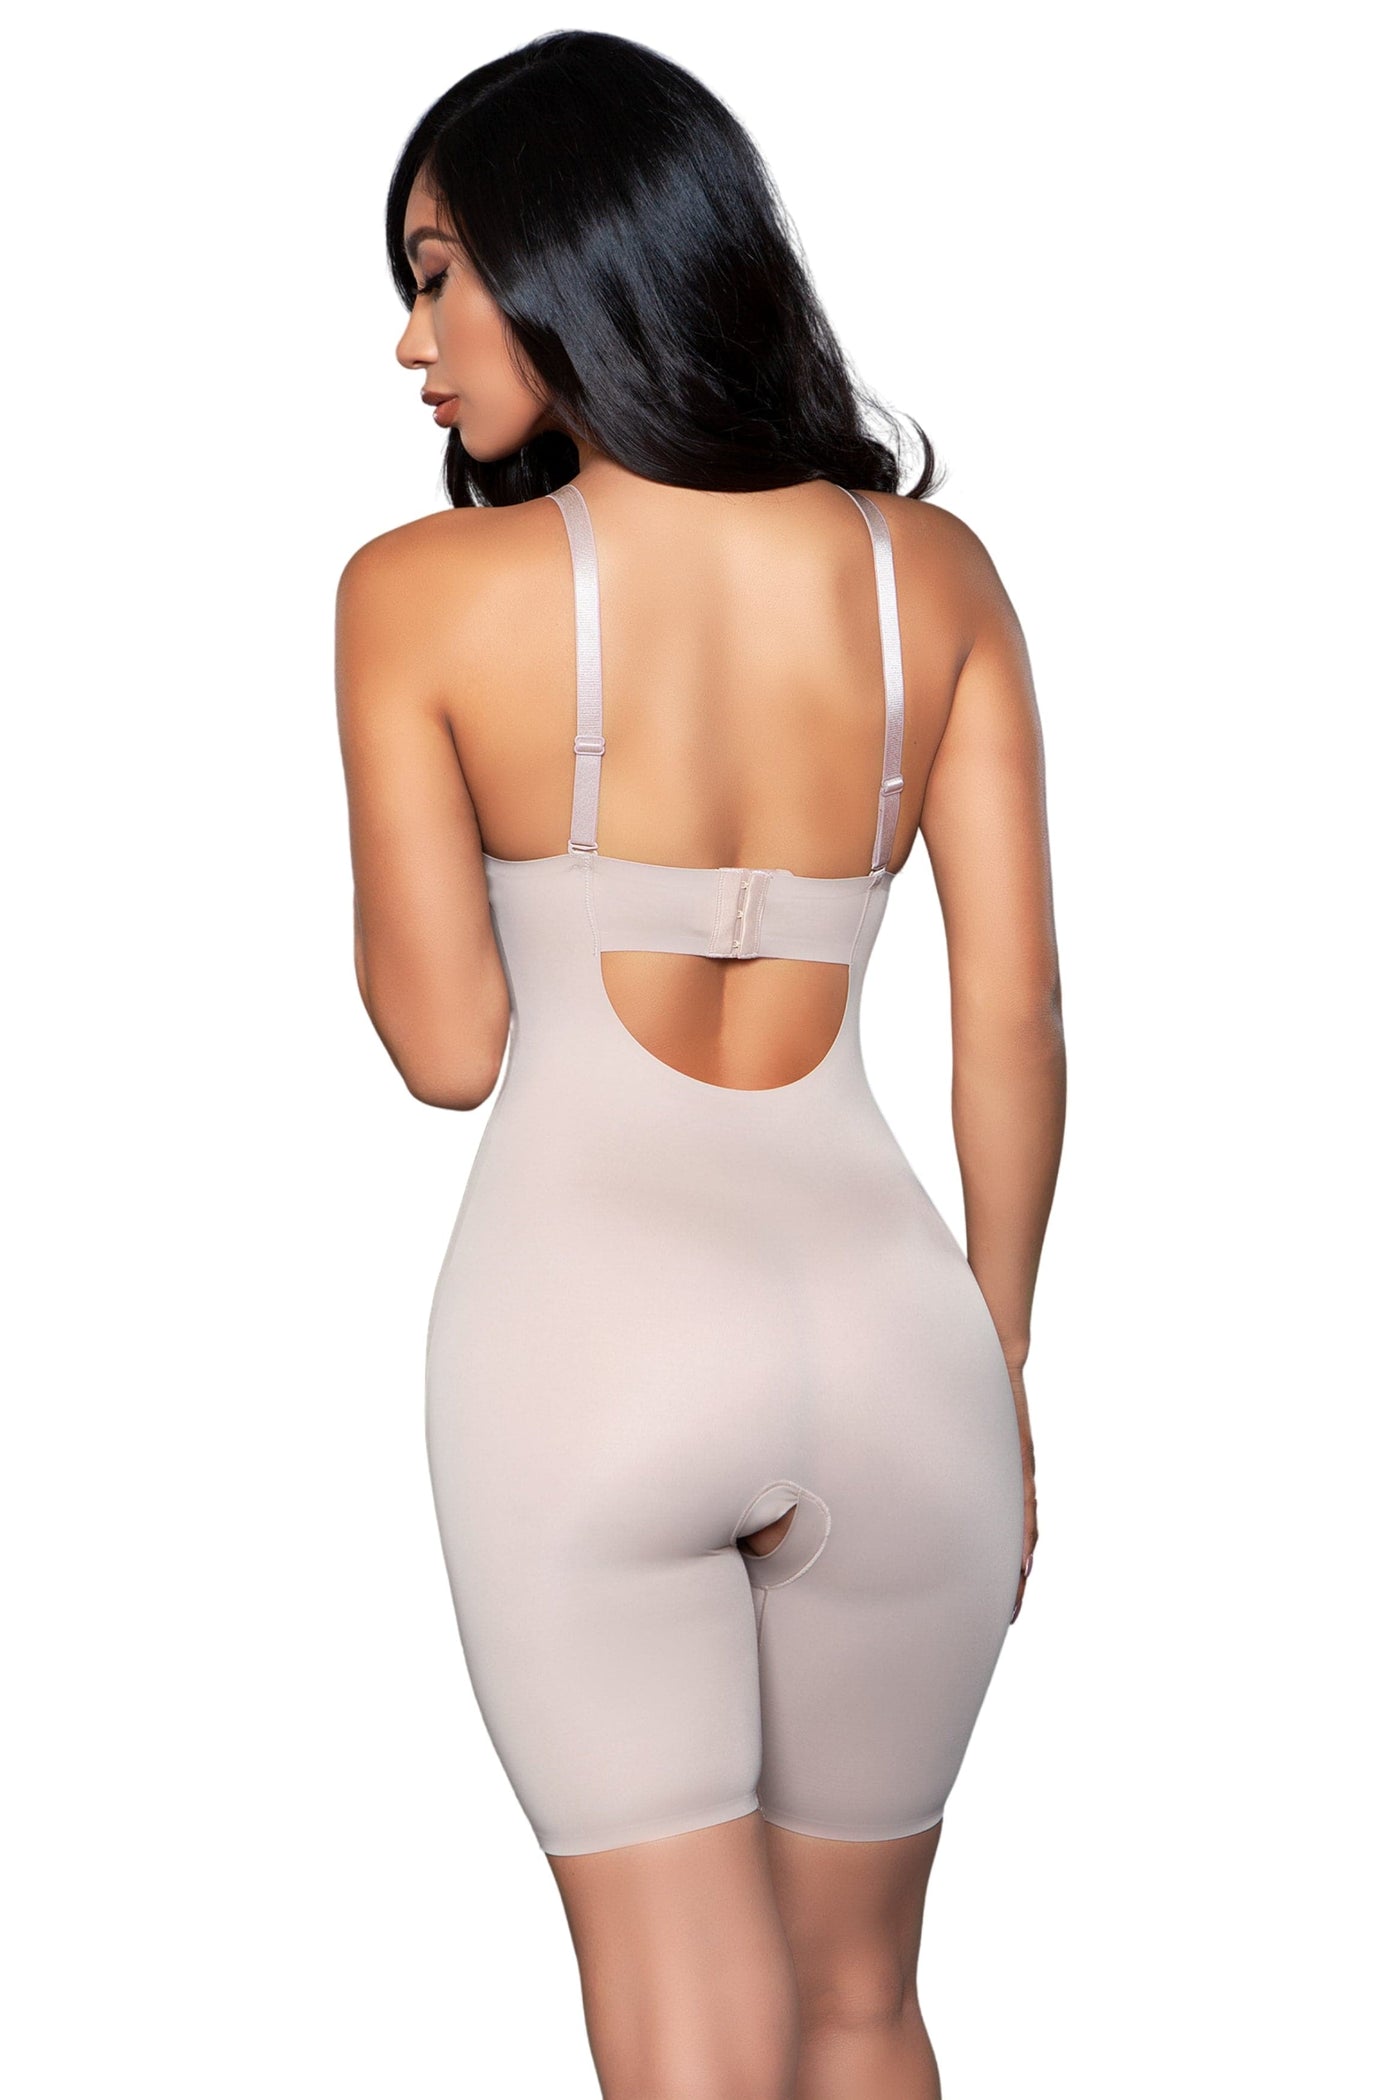 Multiway Strap Shapewear Suit - For Love of Lingerie